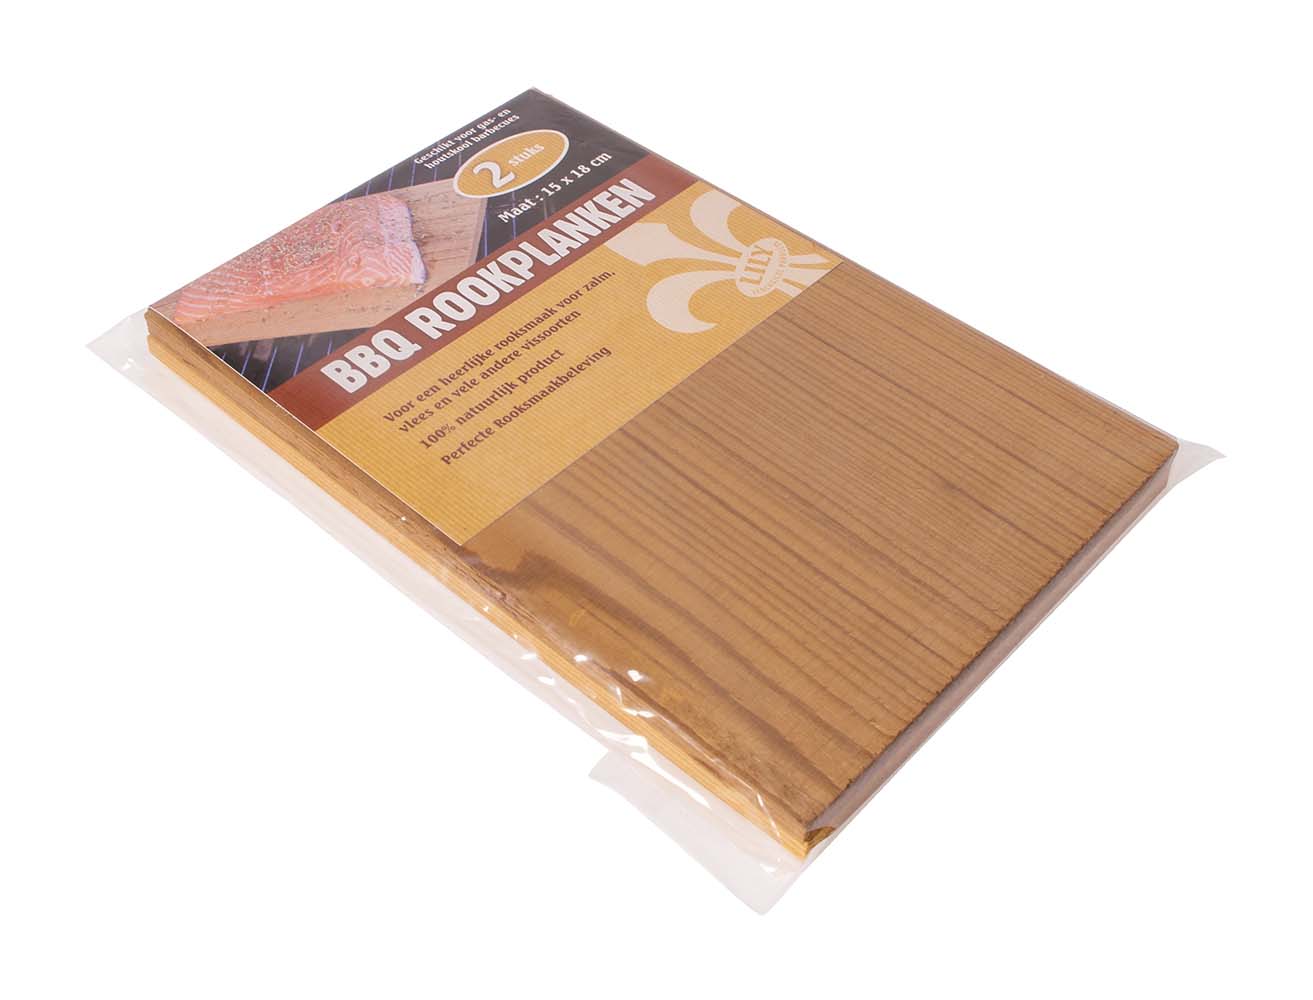 8107915 Set of 2 smoker planks. Adds a delicious smoke flavour to meat or fish dishes. This 100% natural product creates the perfect smoke flavour. Suitable for use on gas or charcoal barbecues.